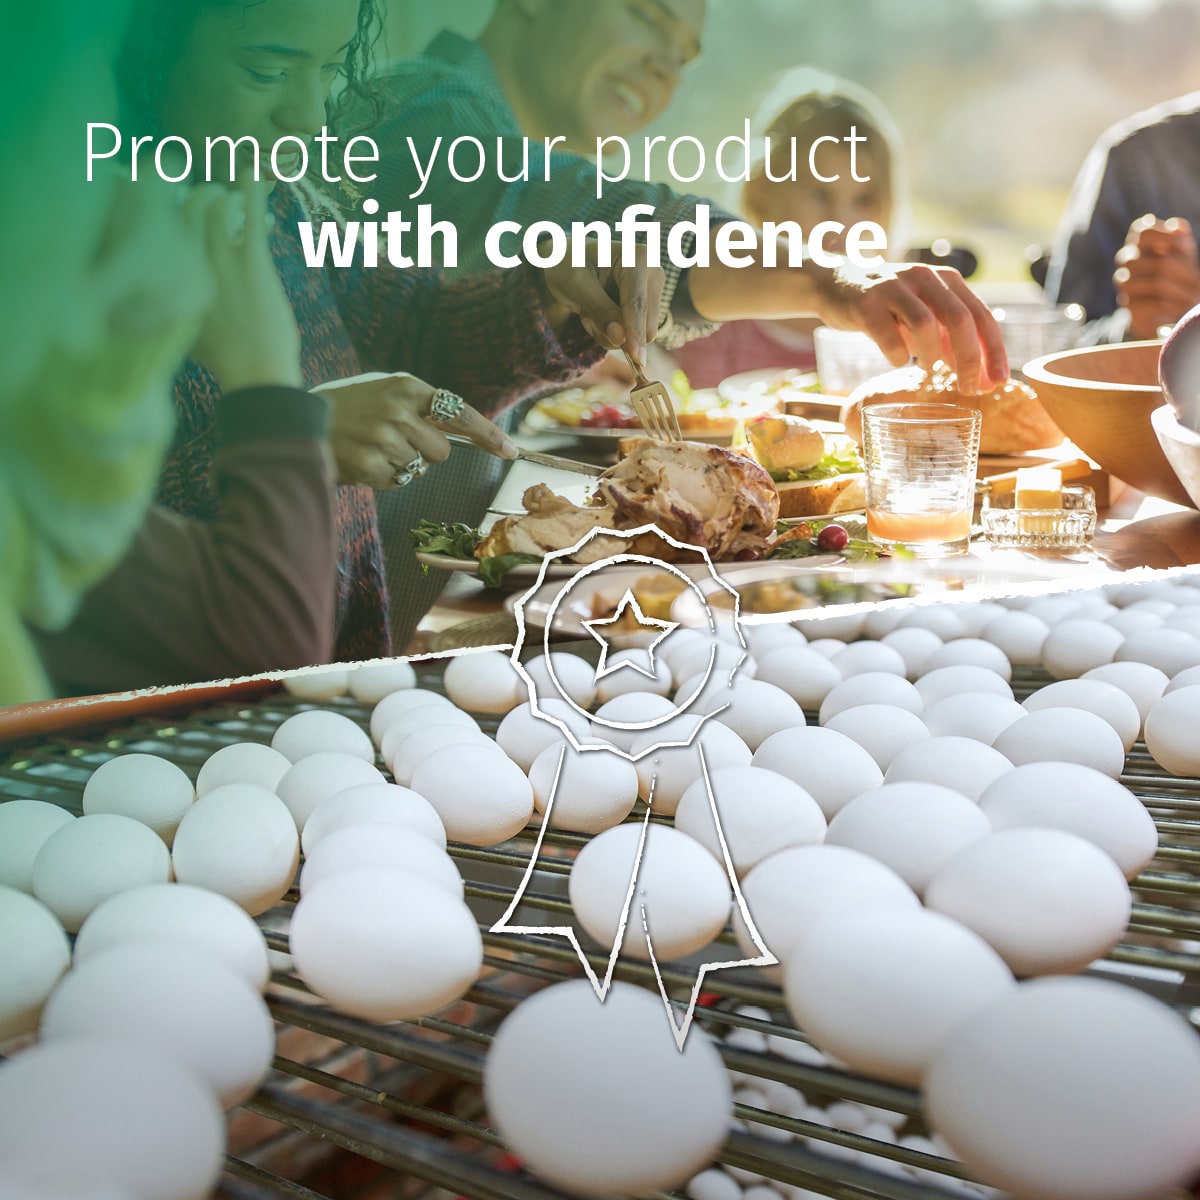 Protect your product with confidence